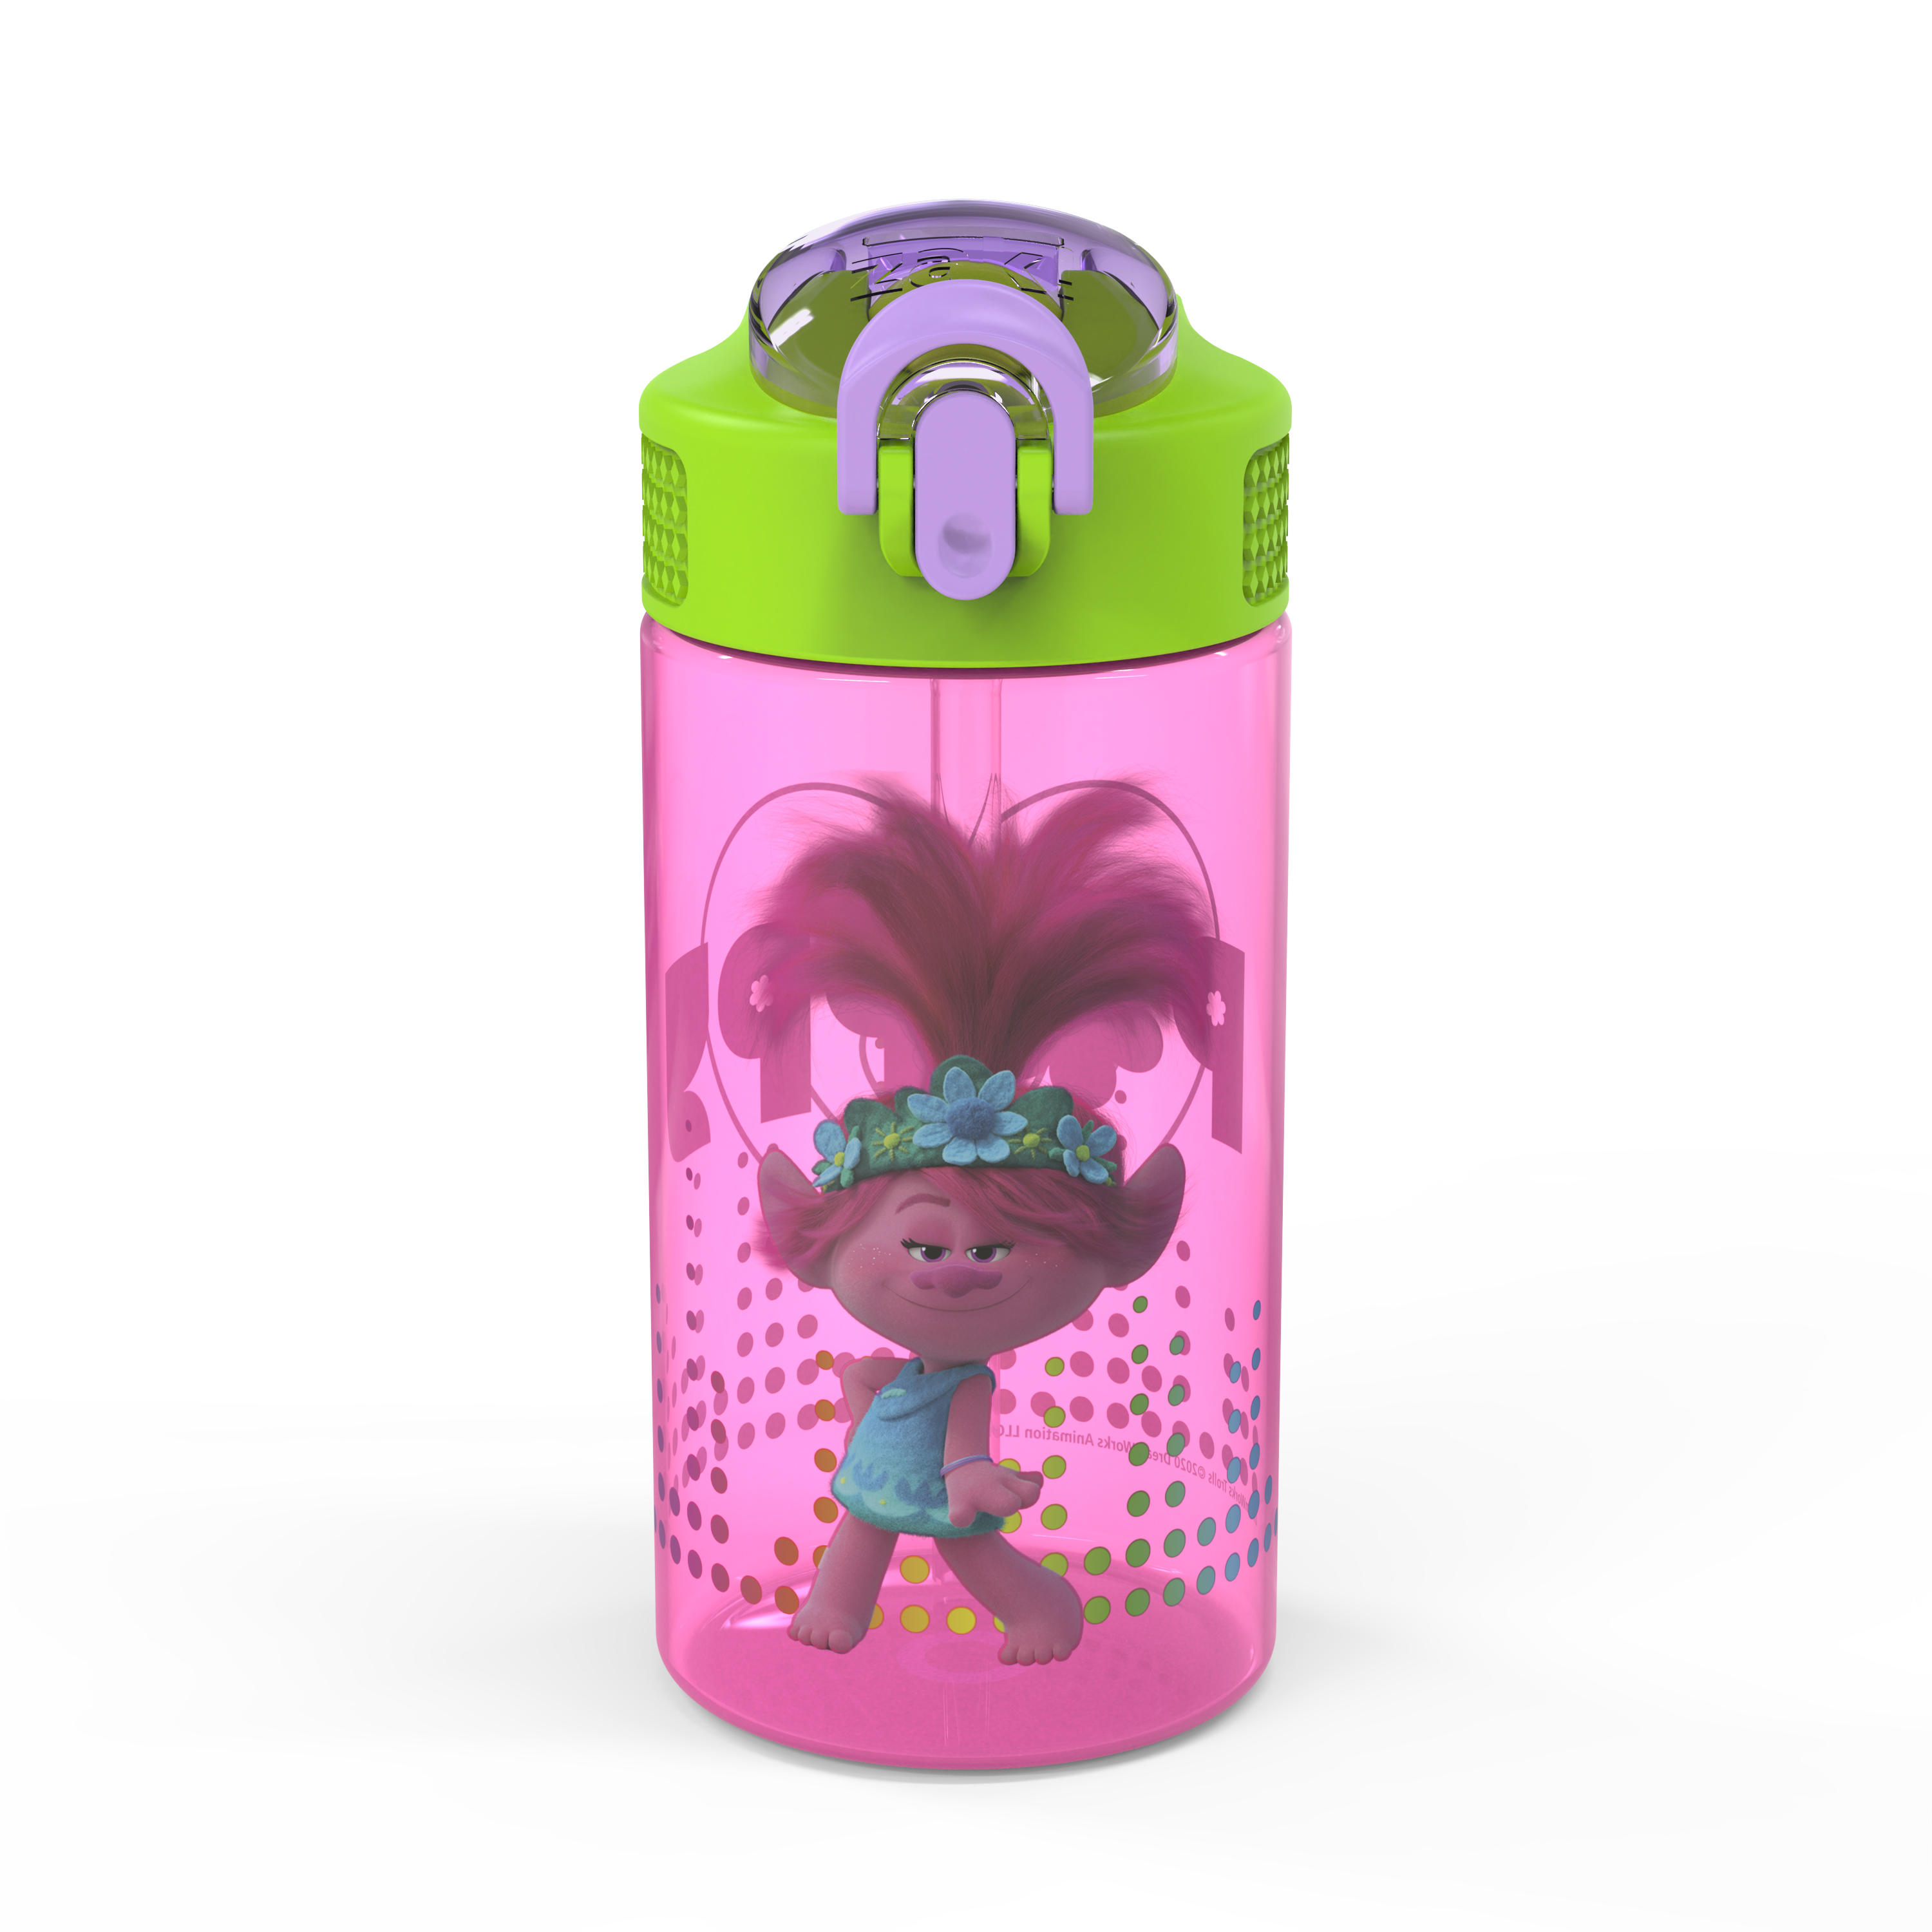 Trolls 2 Movie 16 ounce Reusable Plastic Water Bottle with Straw, Poppy, 2-piece set slideshow image 1